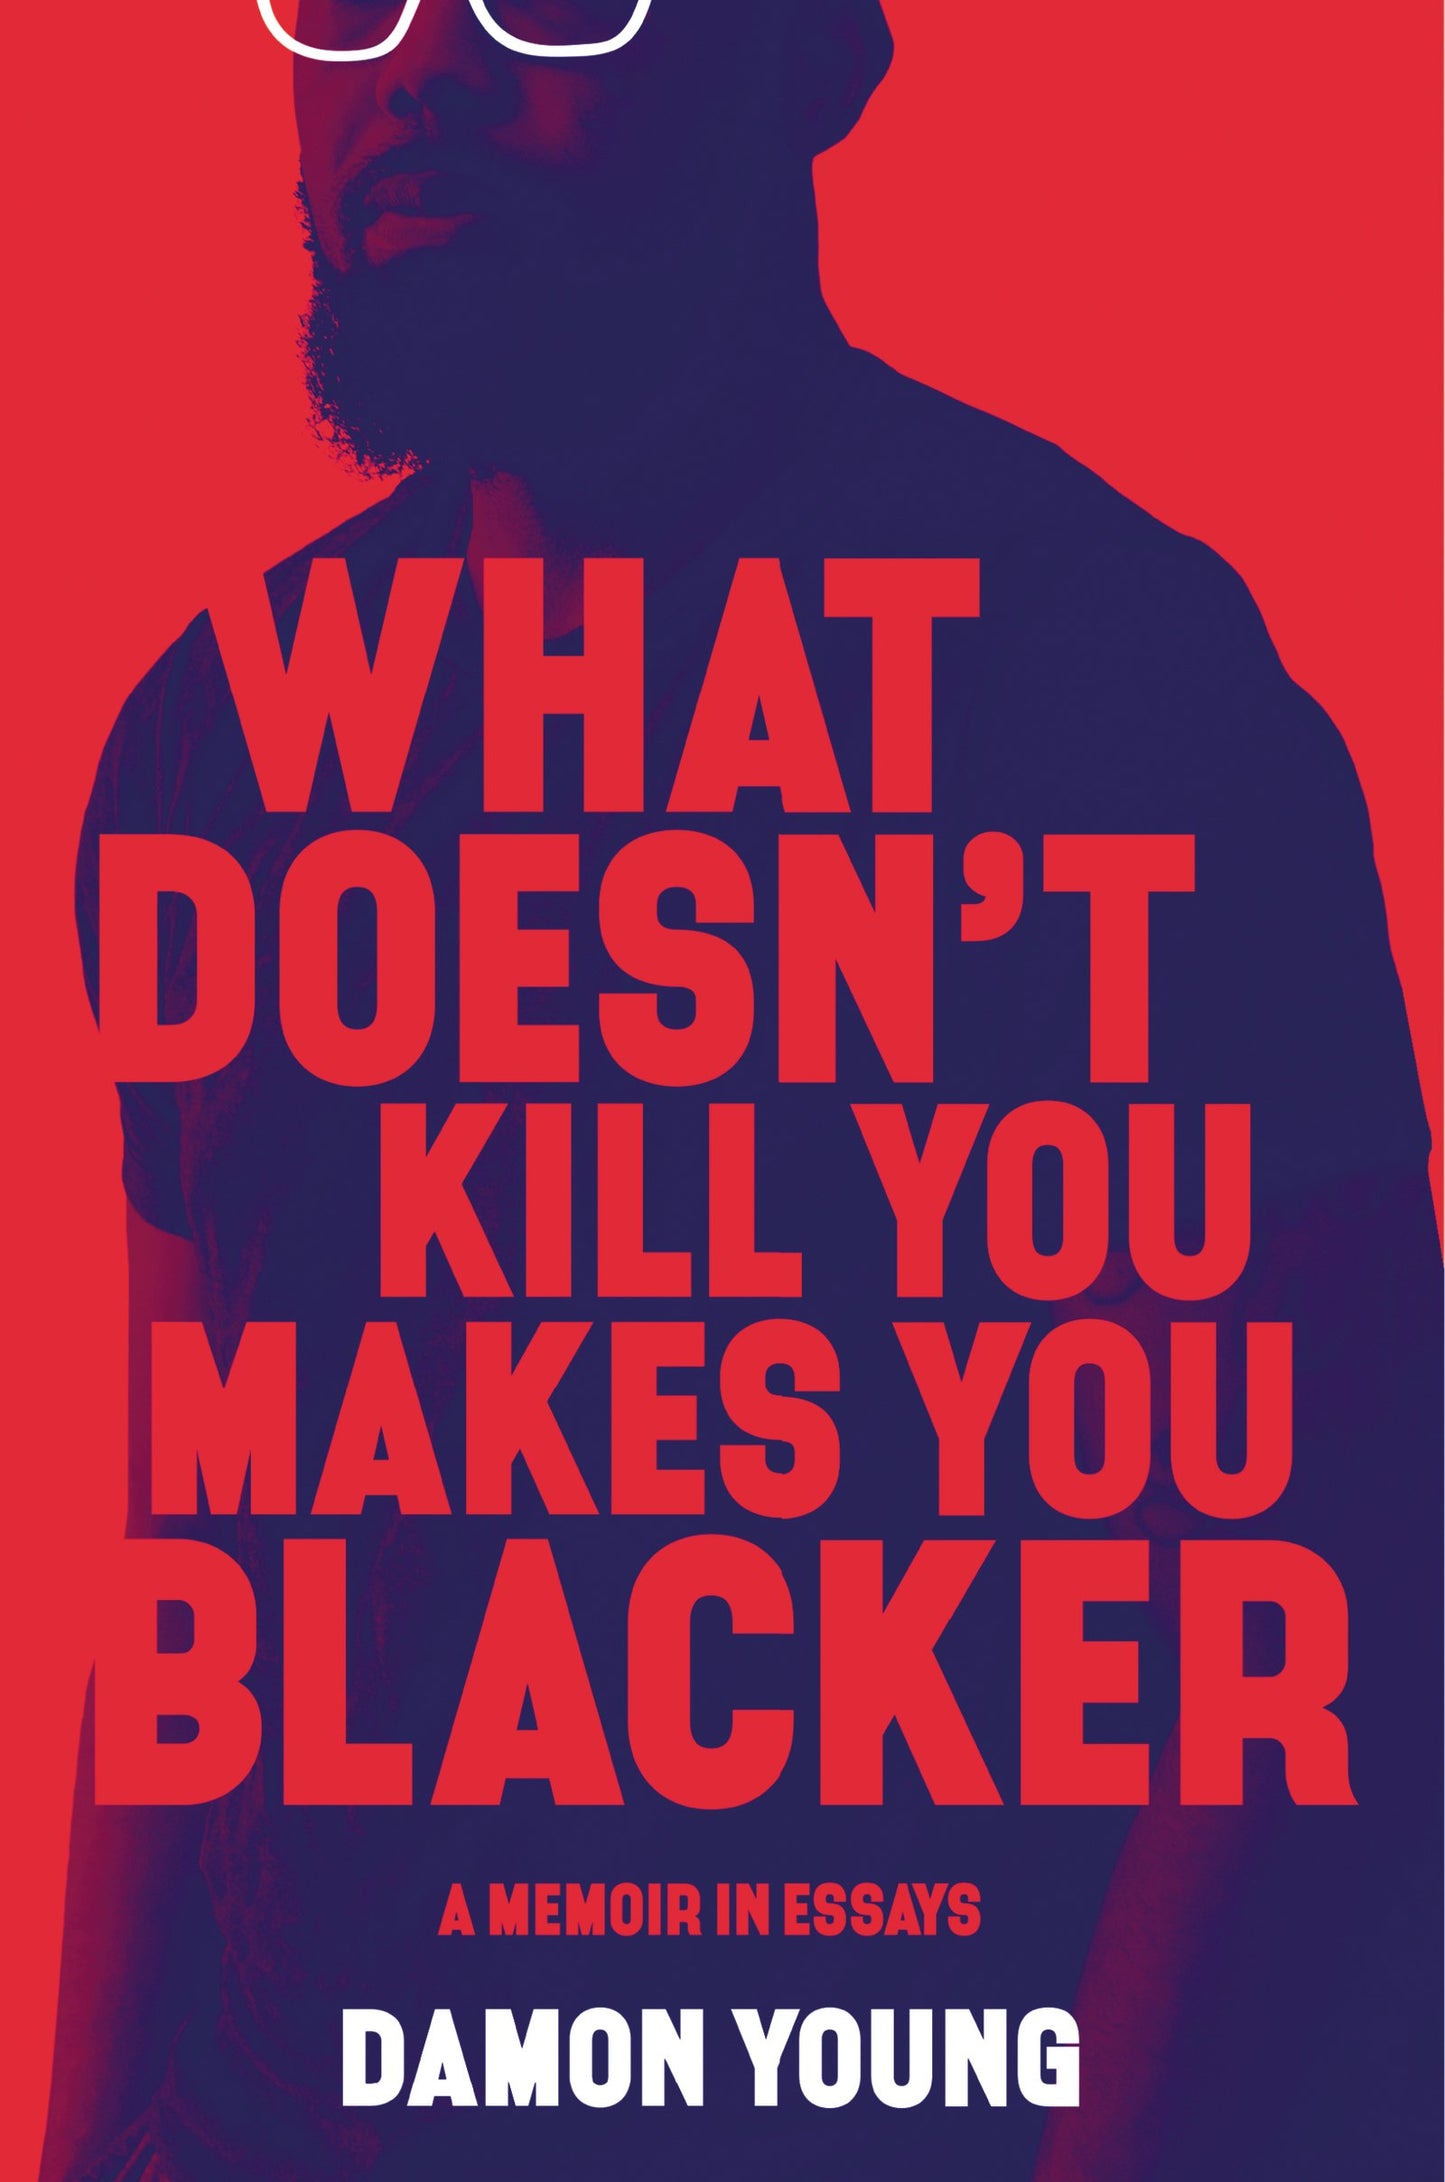 What Doesn't Kill You Makes You Blacker // A Memoir in Essays